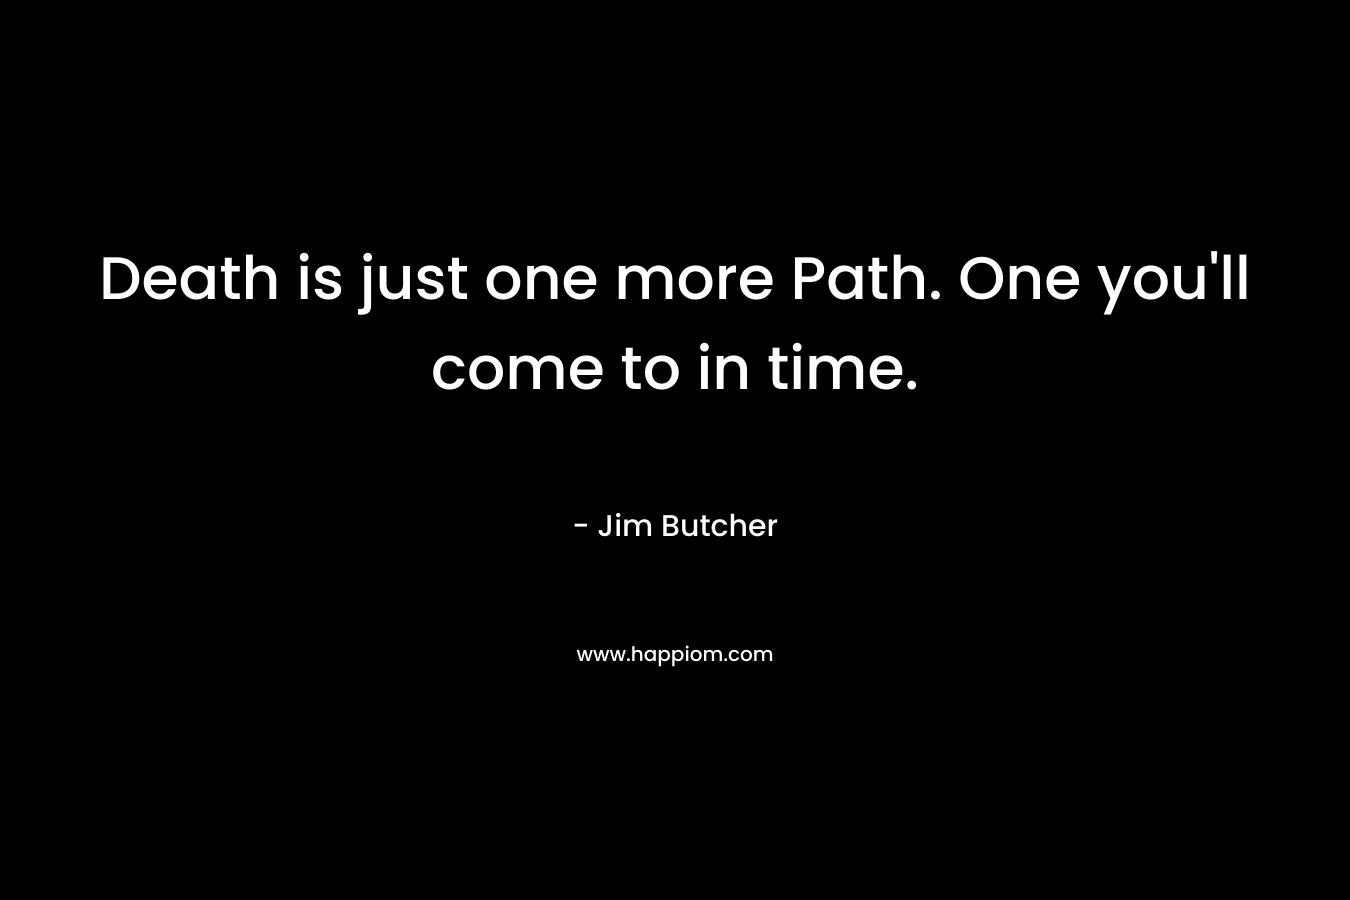 Death is just one more Path. One you’ll come to in time. – Jim Butcher